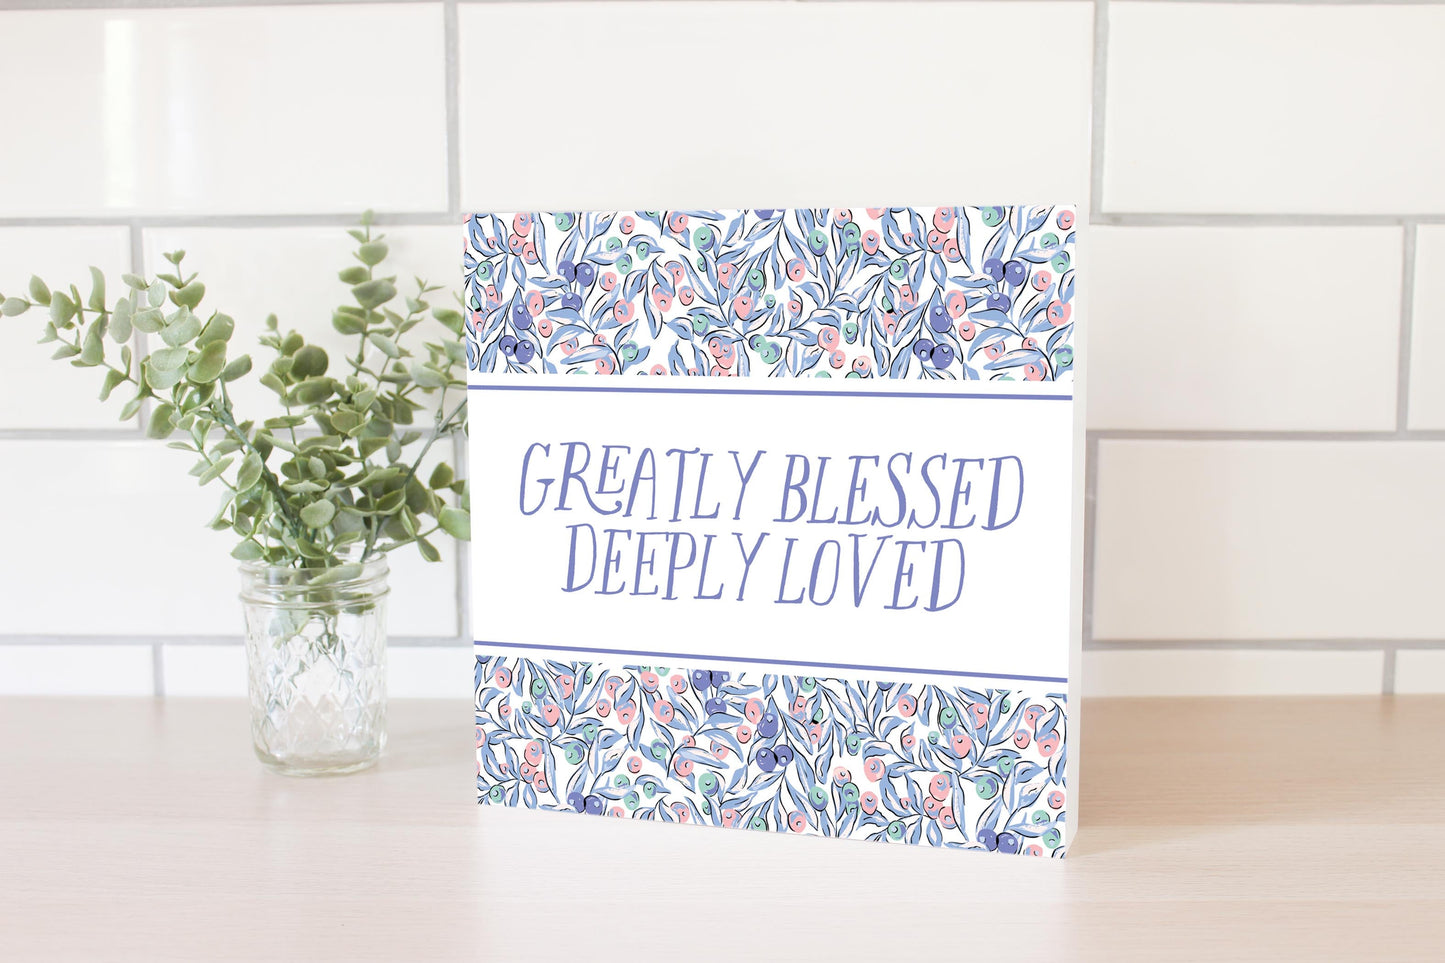 Clairmont & Co Faith Greatly Blessed Deeply Loved | 10x10